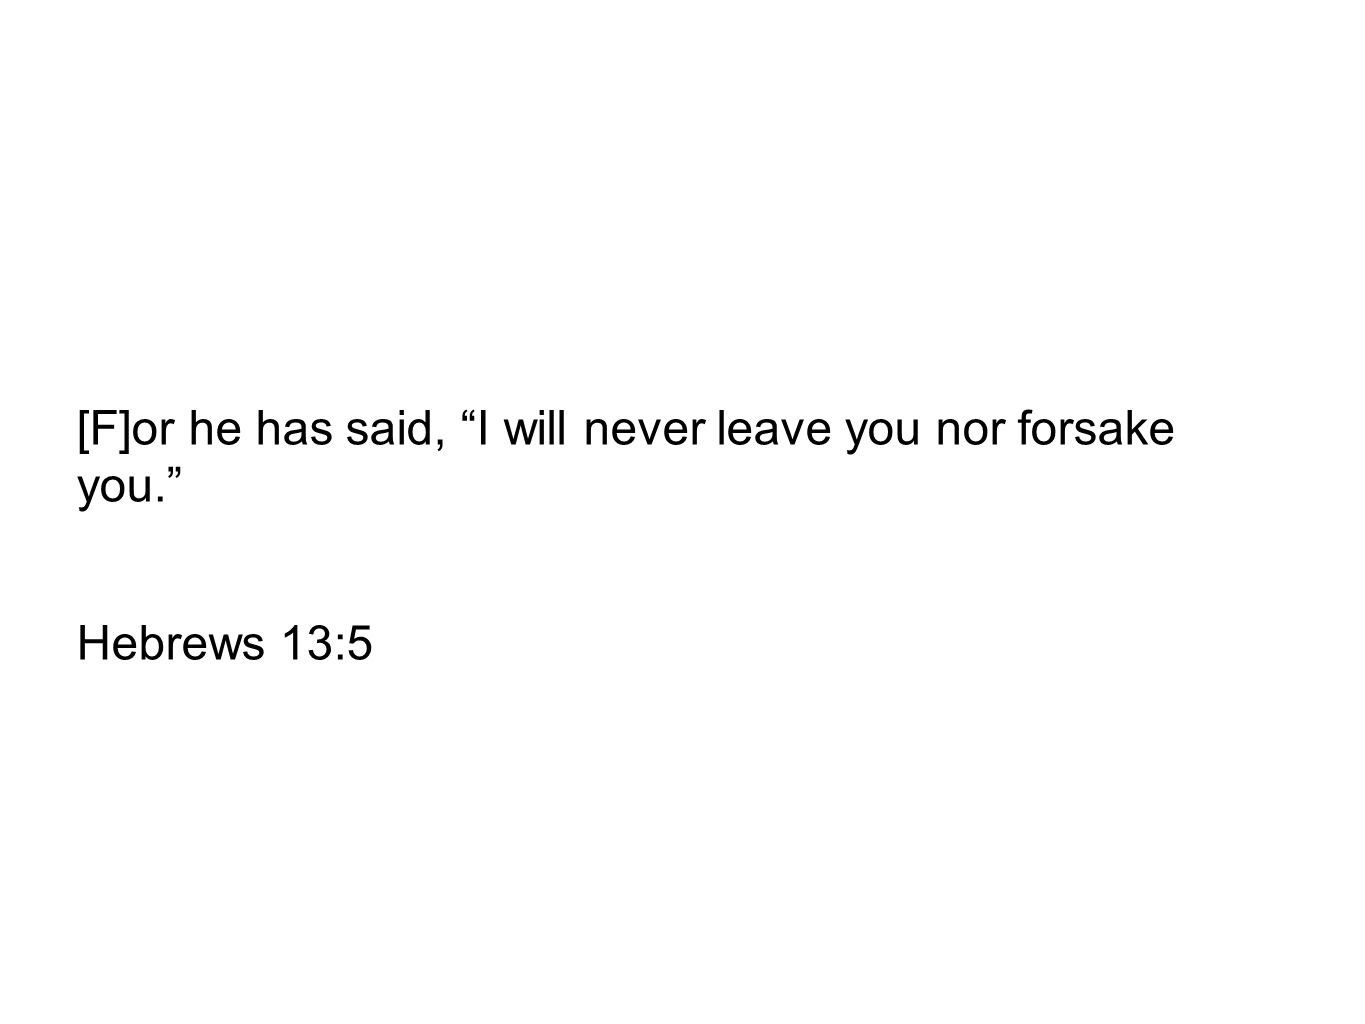 [F]or he has said, I will never leave you nor forsake you.